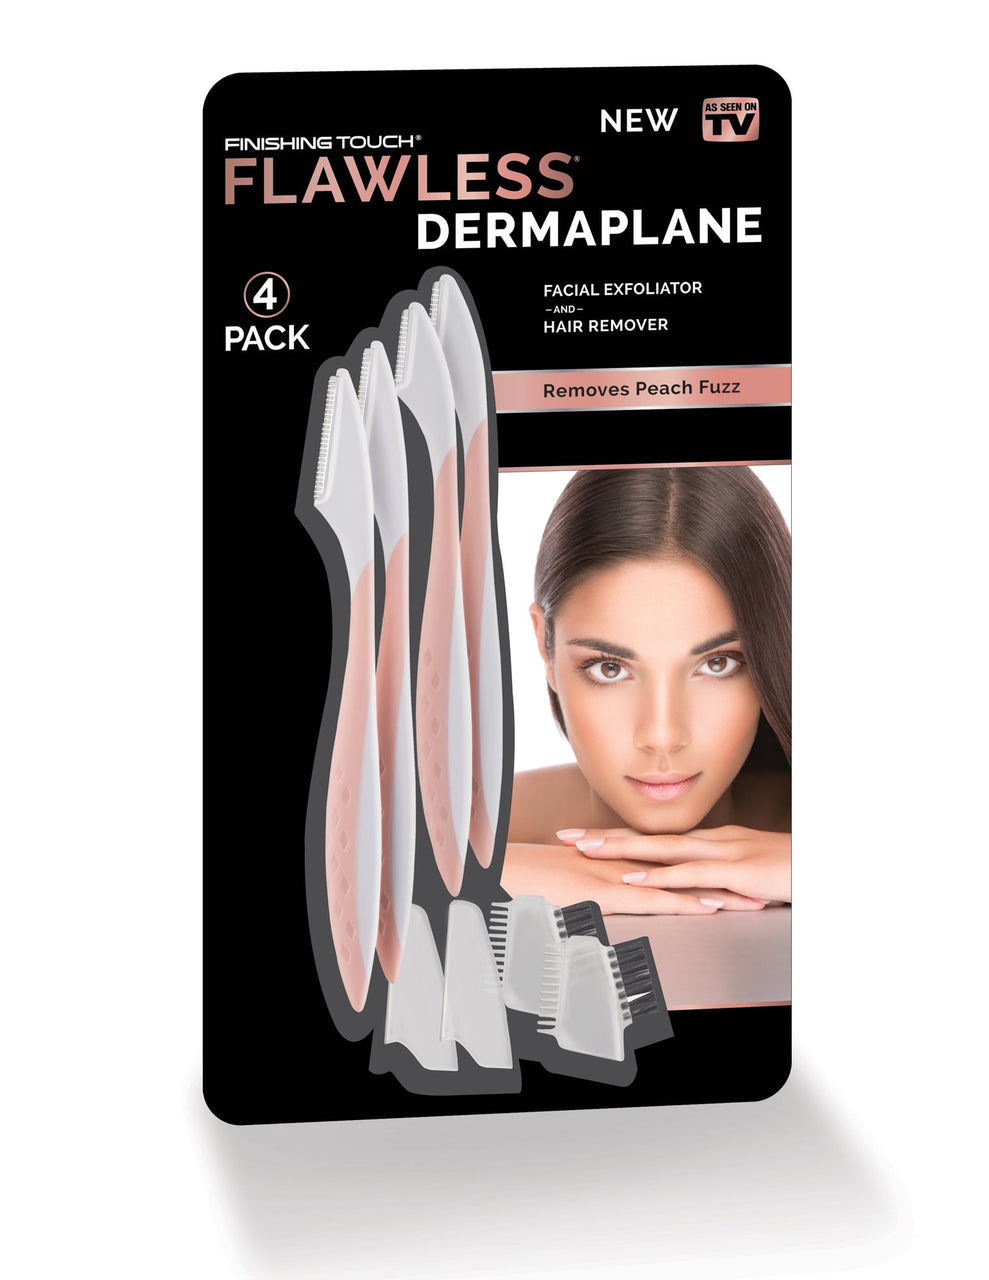 Finishing Touch Flawless Dermaplane Facial Exfoliator Hair Remover